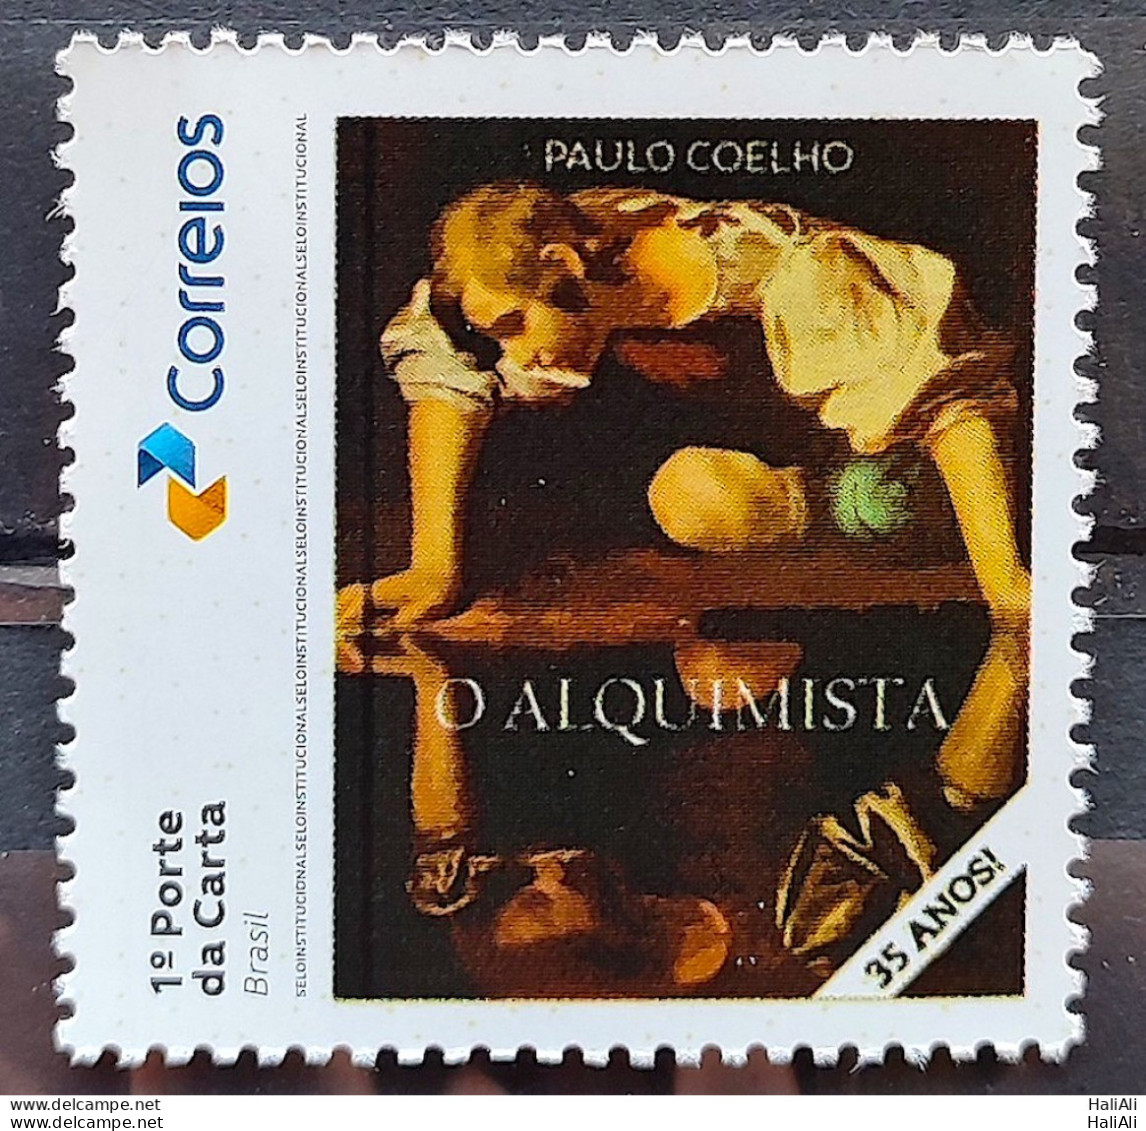 SI 05 Brazil Institutional Stamp Alchemist Paulo Coelho Literature 2023 - Personalized Stamps